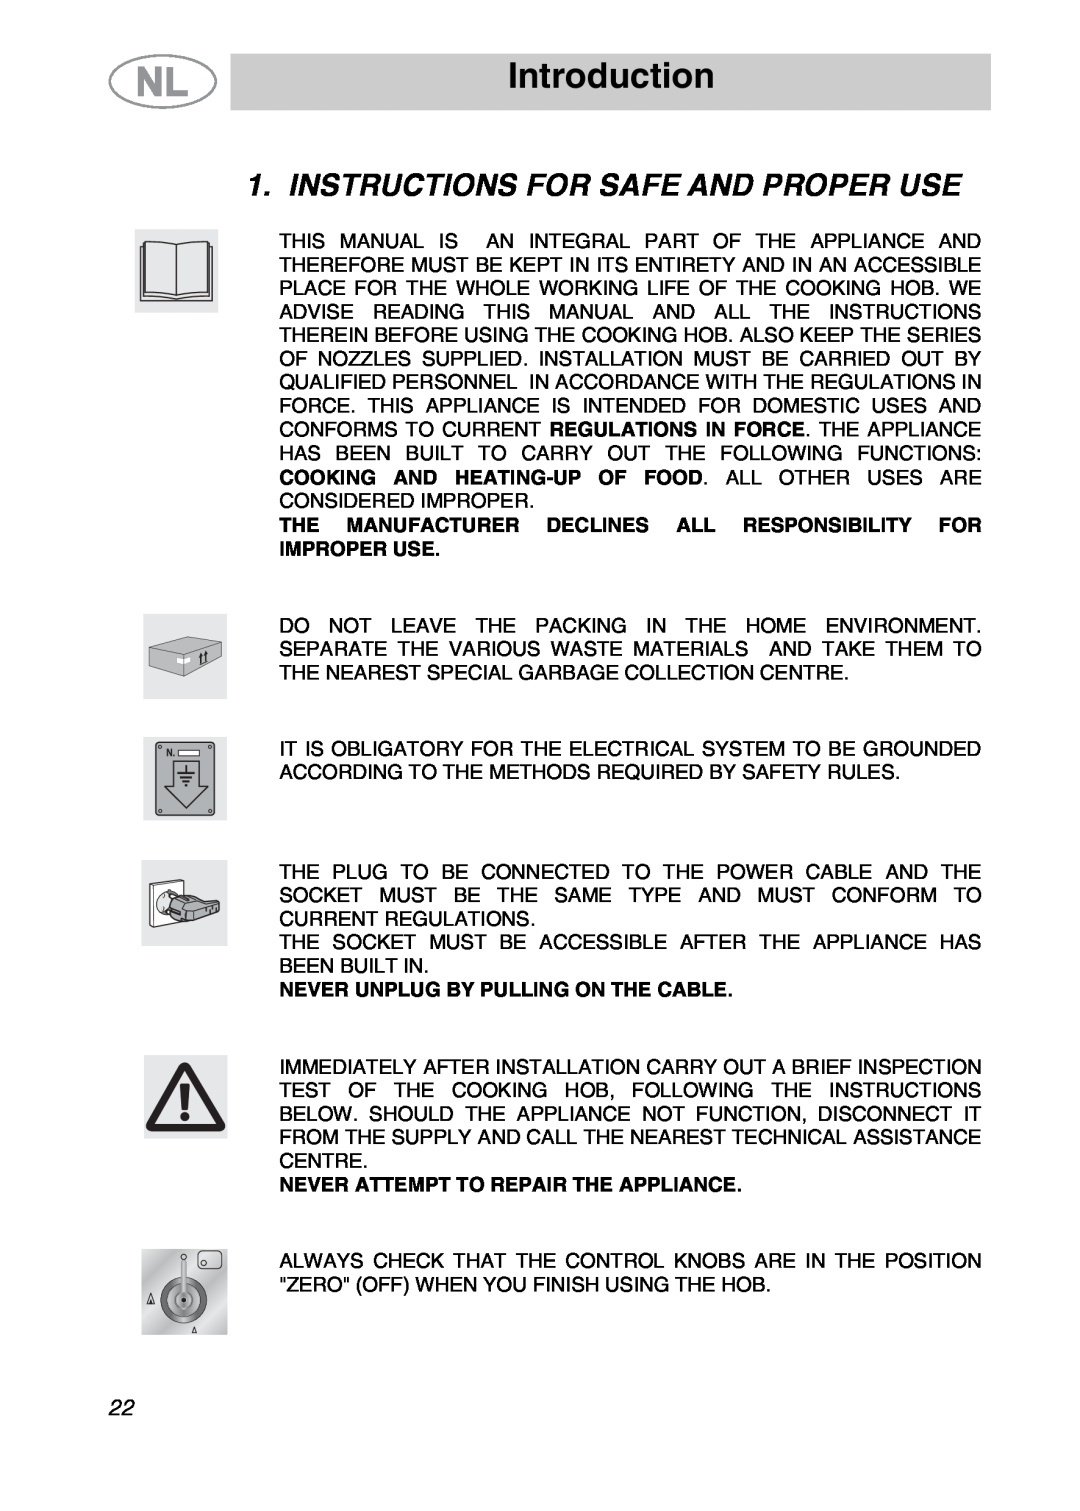 Smeg GKC641-3 manual Introduction, Instructions For Safe And Proper Use, Never Unplug By Pulling On The Cable 